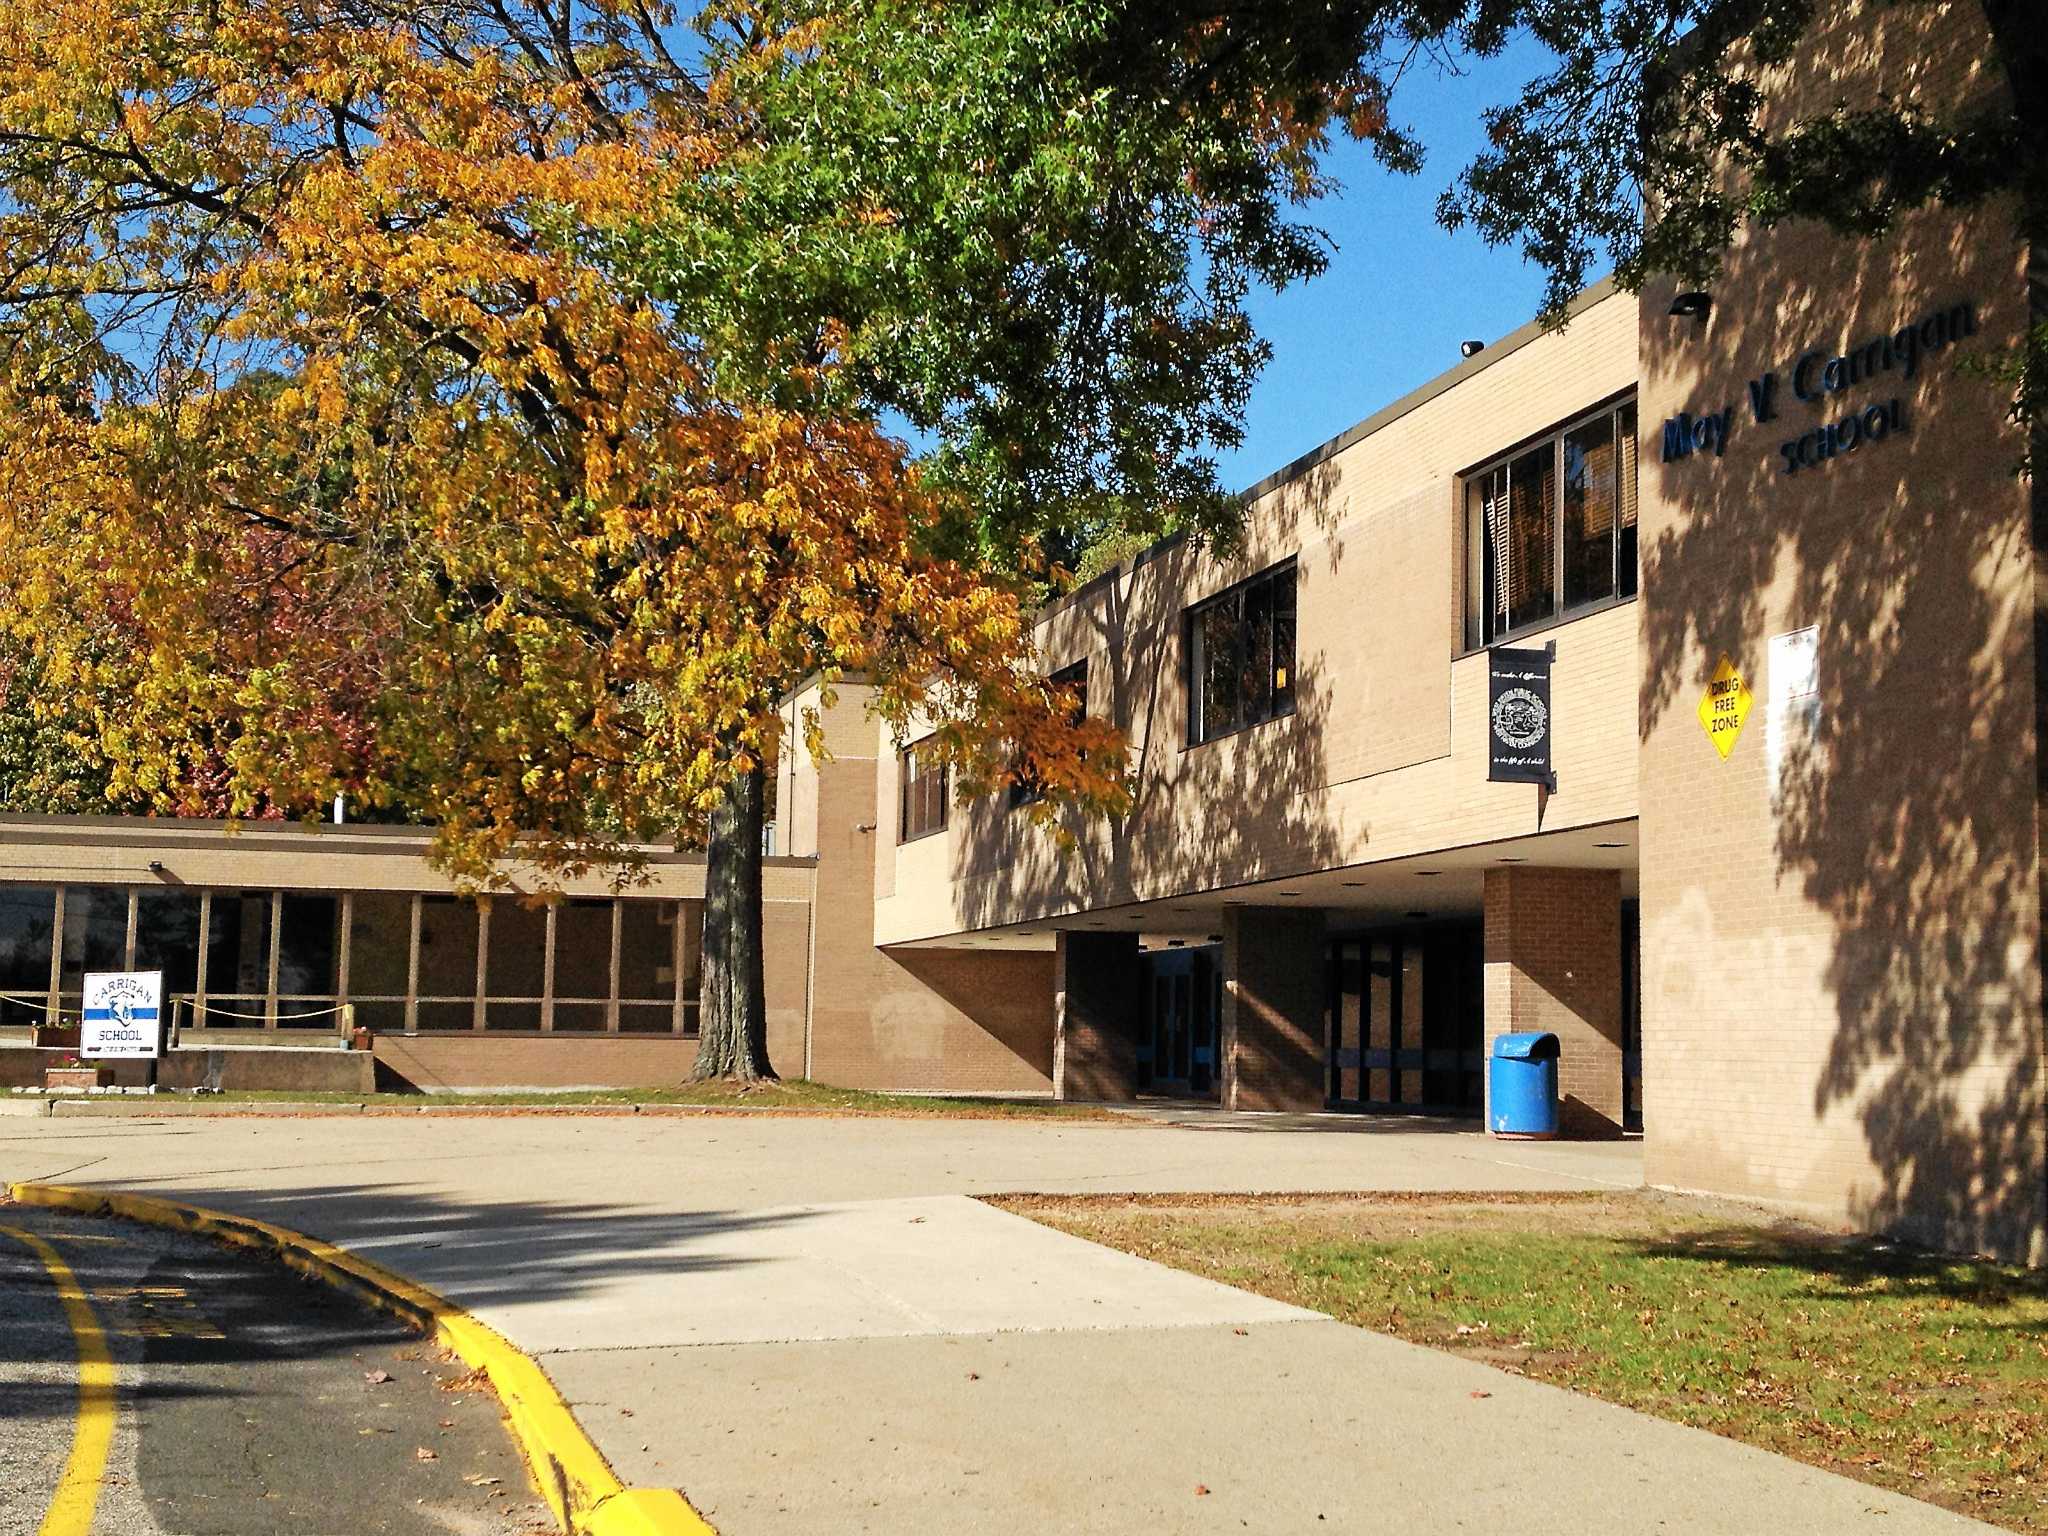 Plans move forward to rehab Carrigan Intermediate School in West Haven